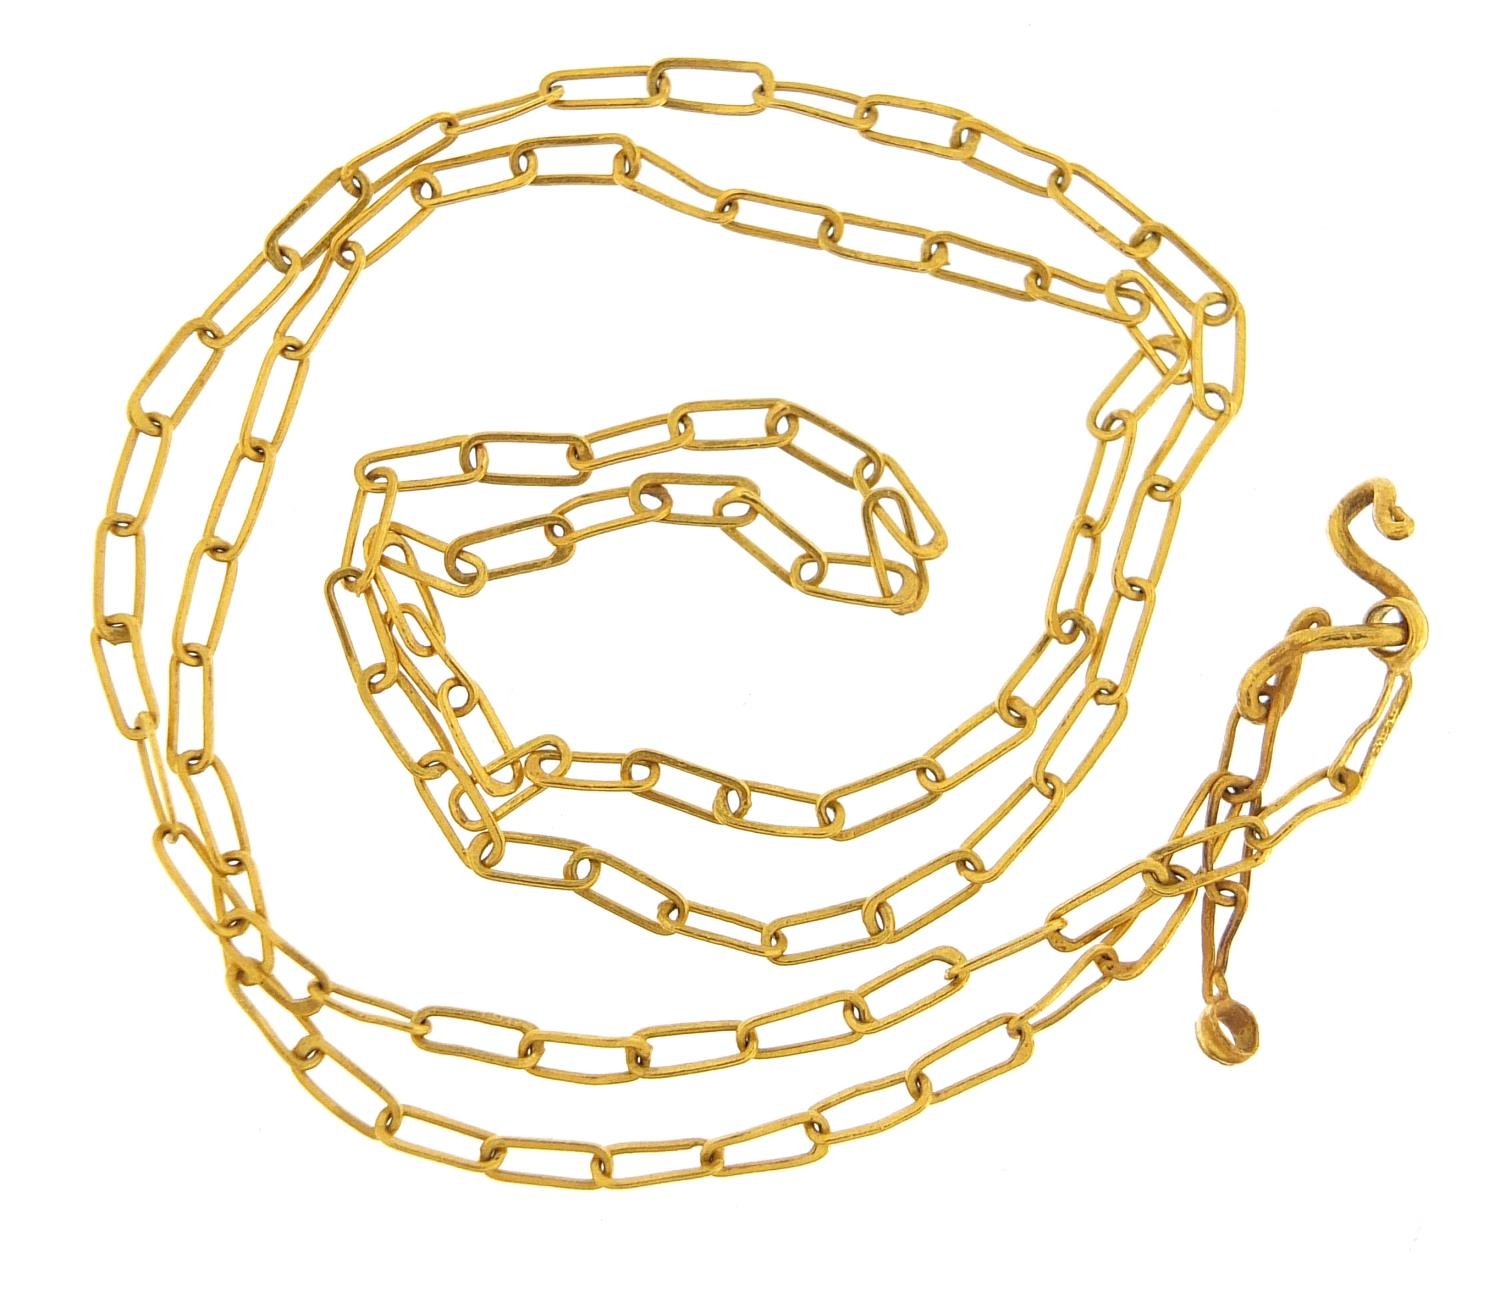 High carat gold chain link necklace, indistinct marks, 42cm in length, 3.9g - this lot is sold - Image 2 of 3